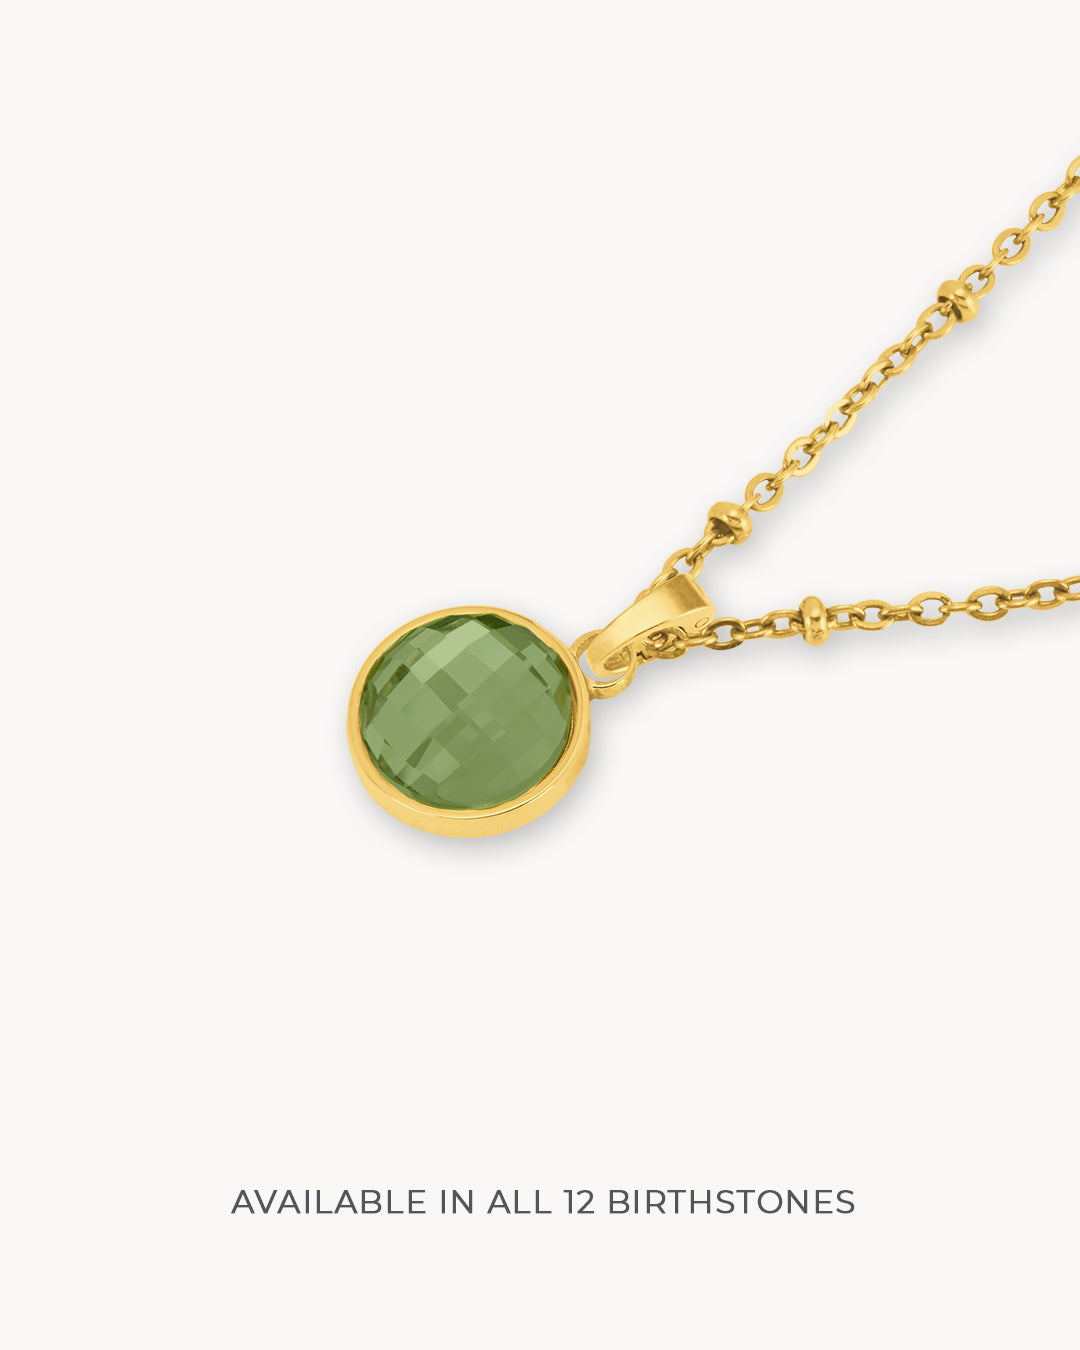 August Signature Birthstone Necklace Set, Gold